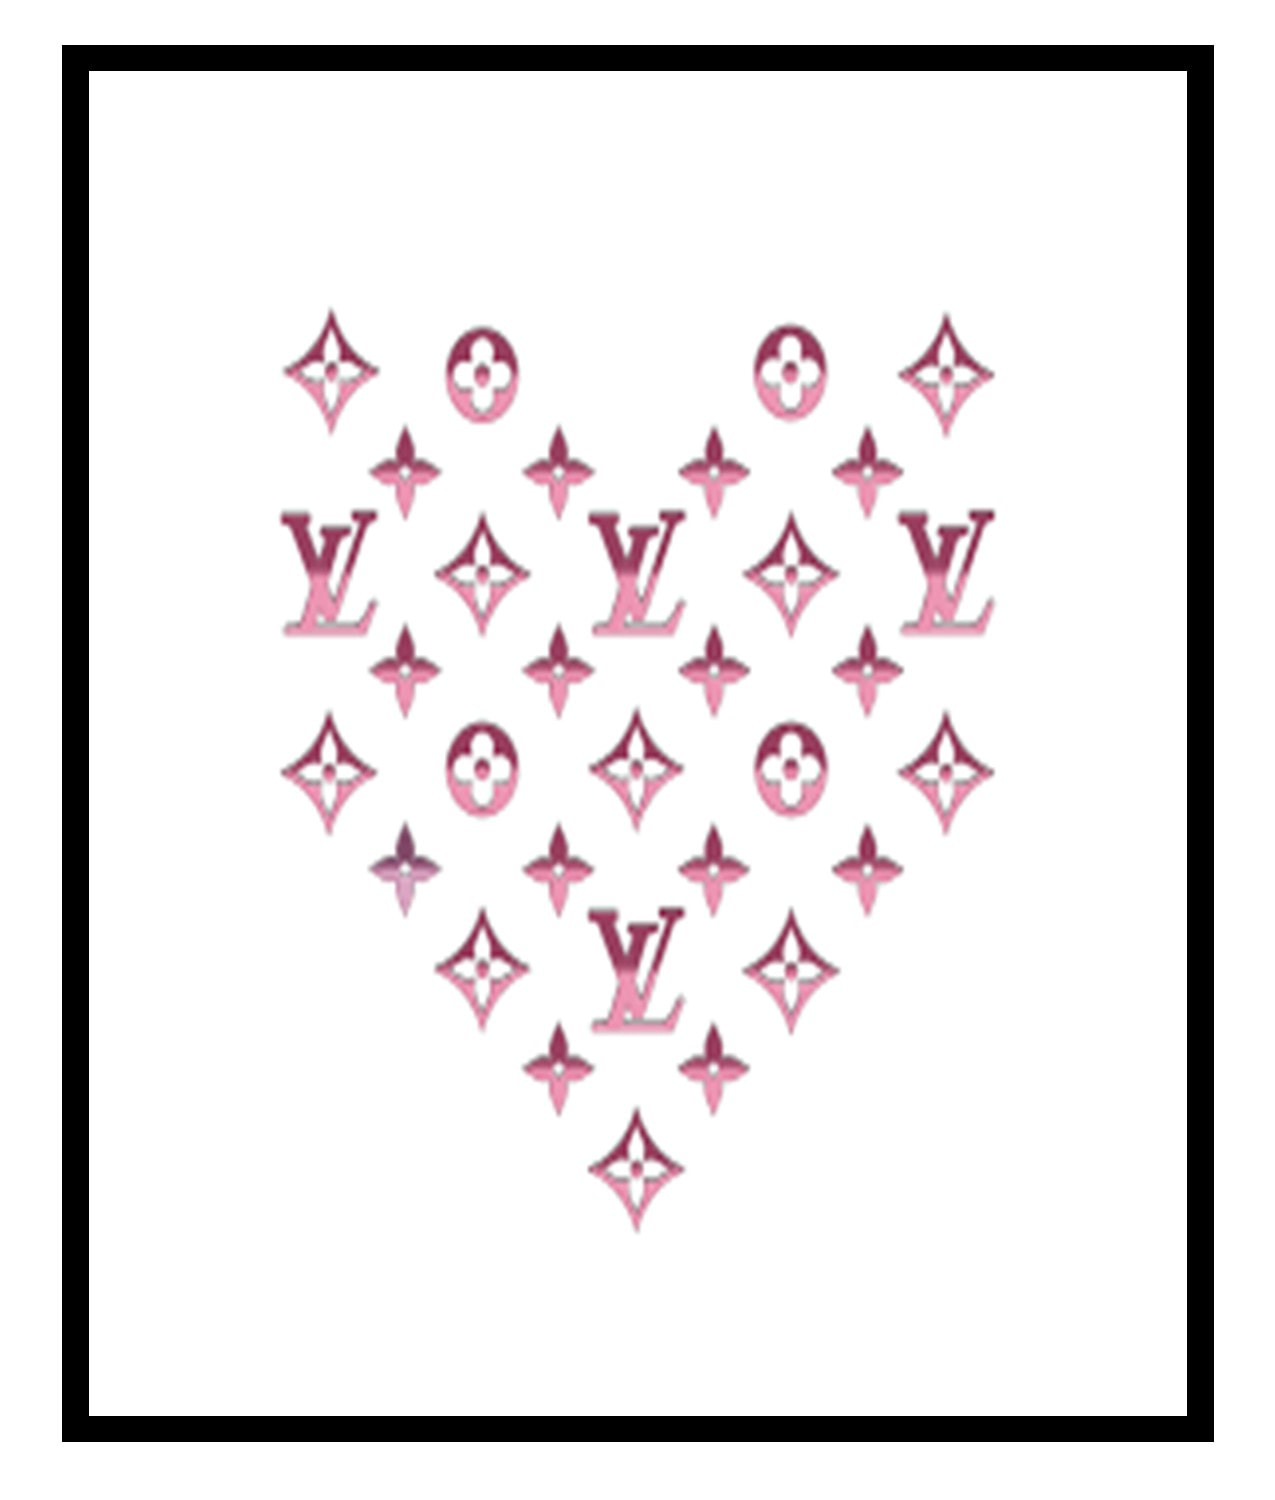 Louis Vuitton Logo inspired 5x7 Poster or Sign